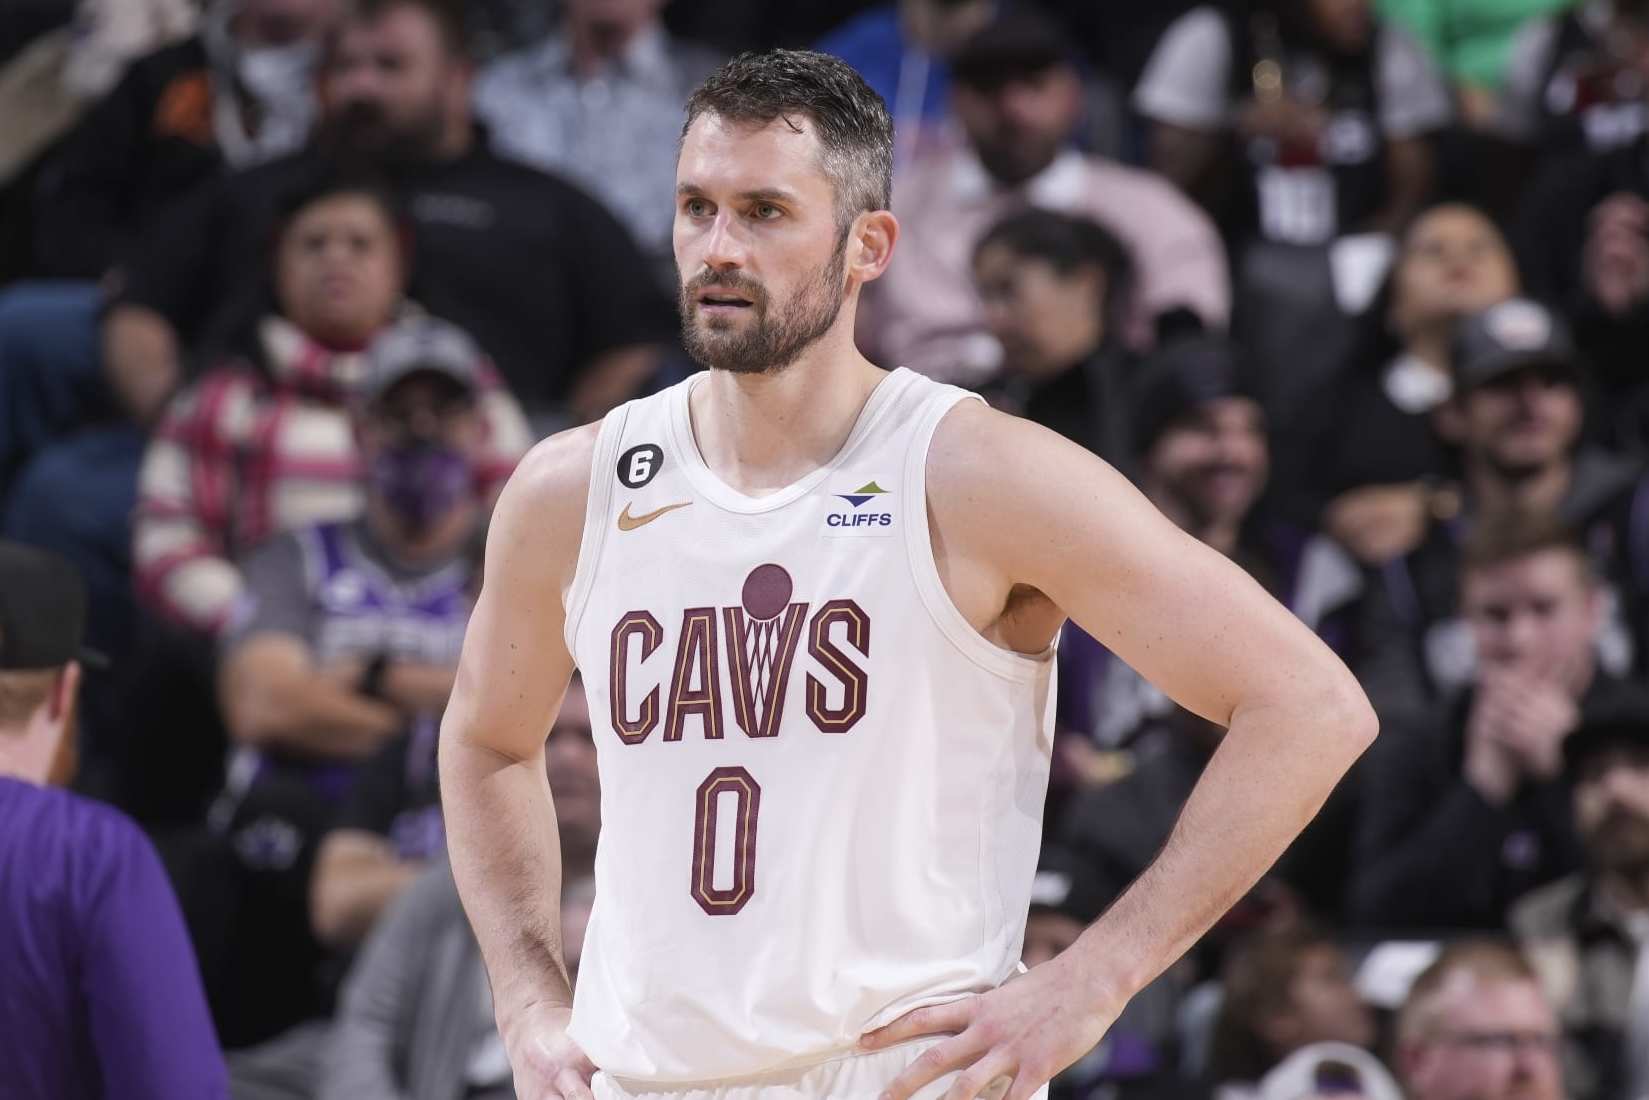 Report: Kevin Love to talk to Sixers before decision on new team